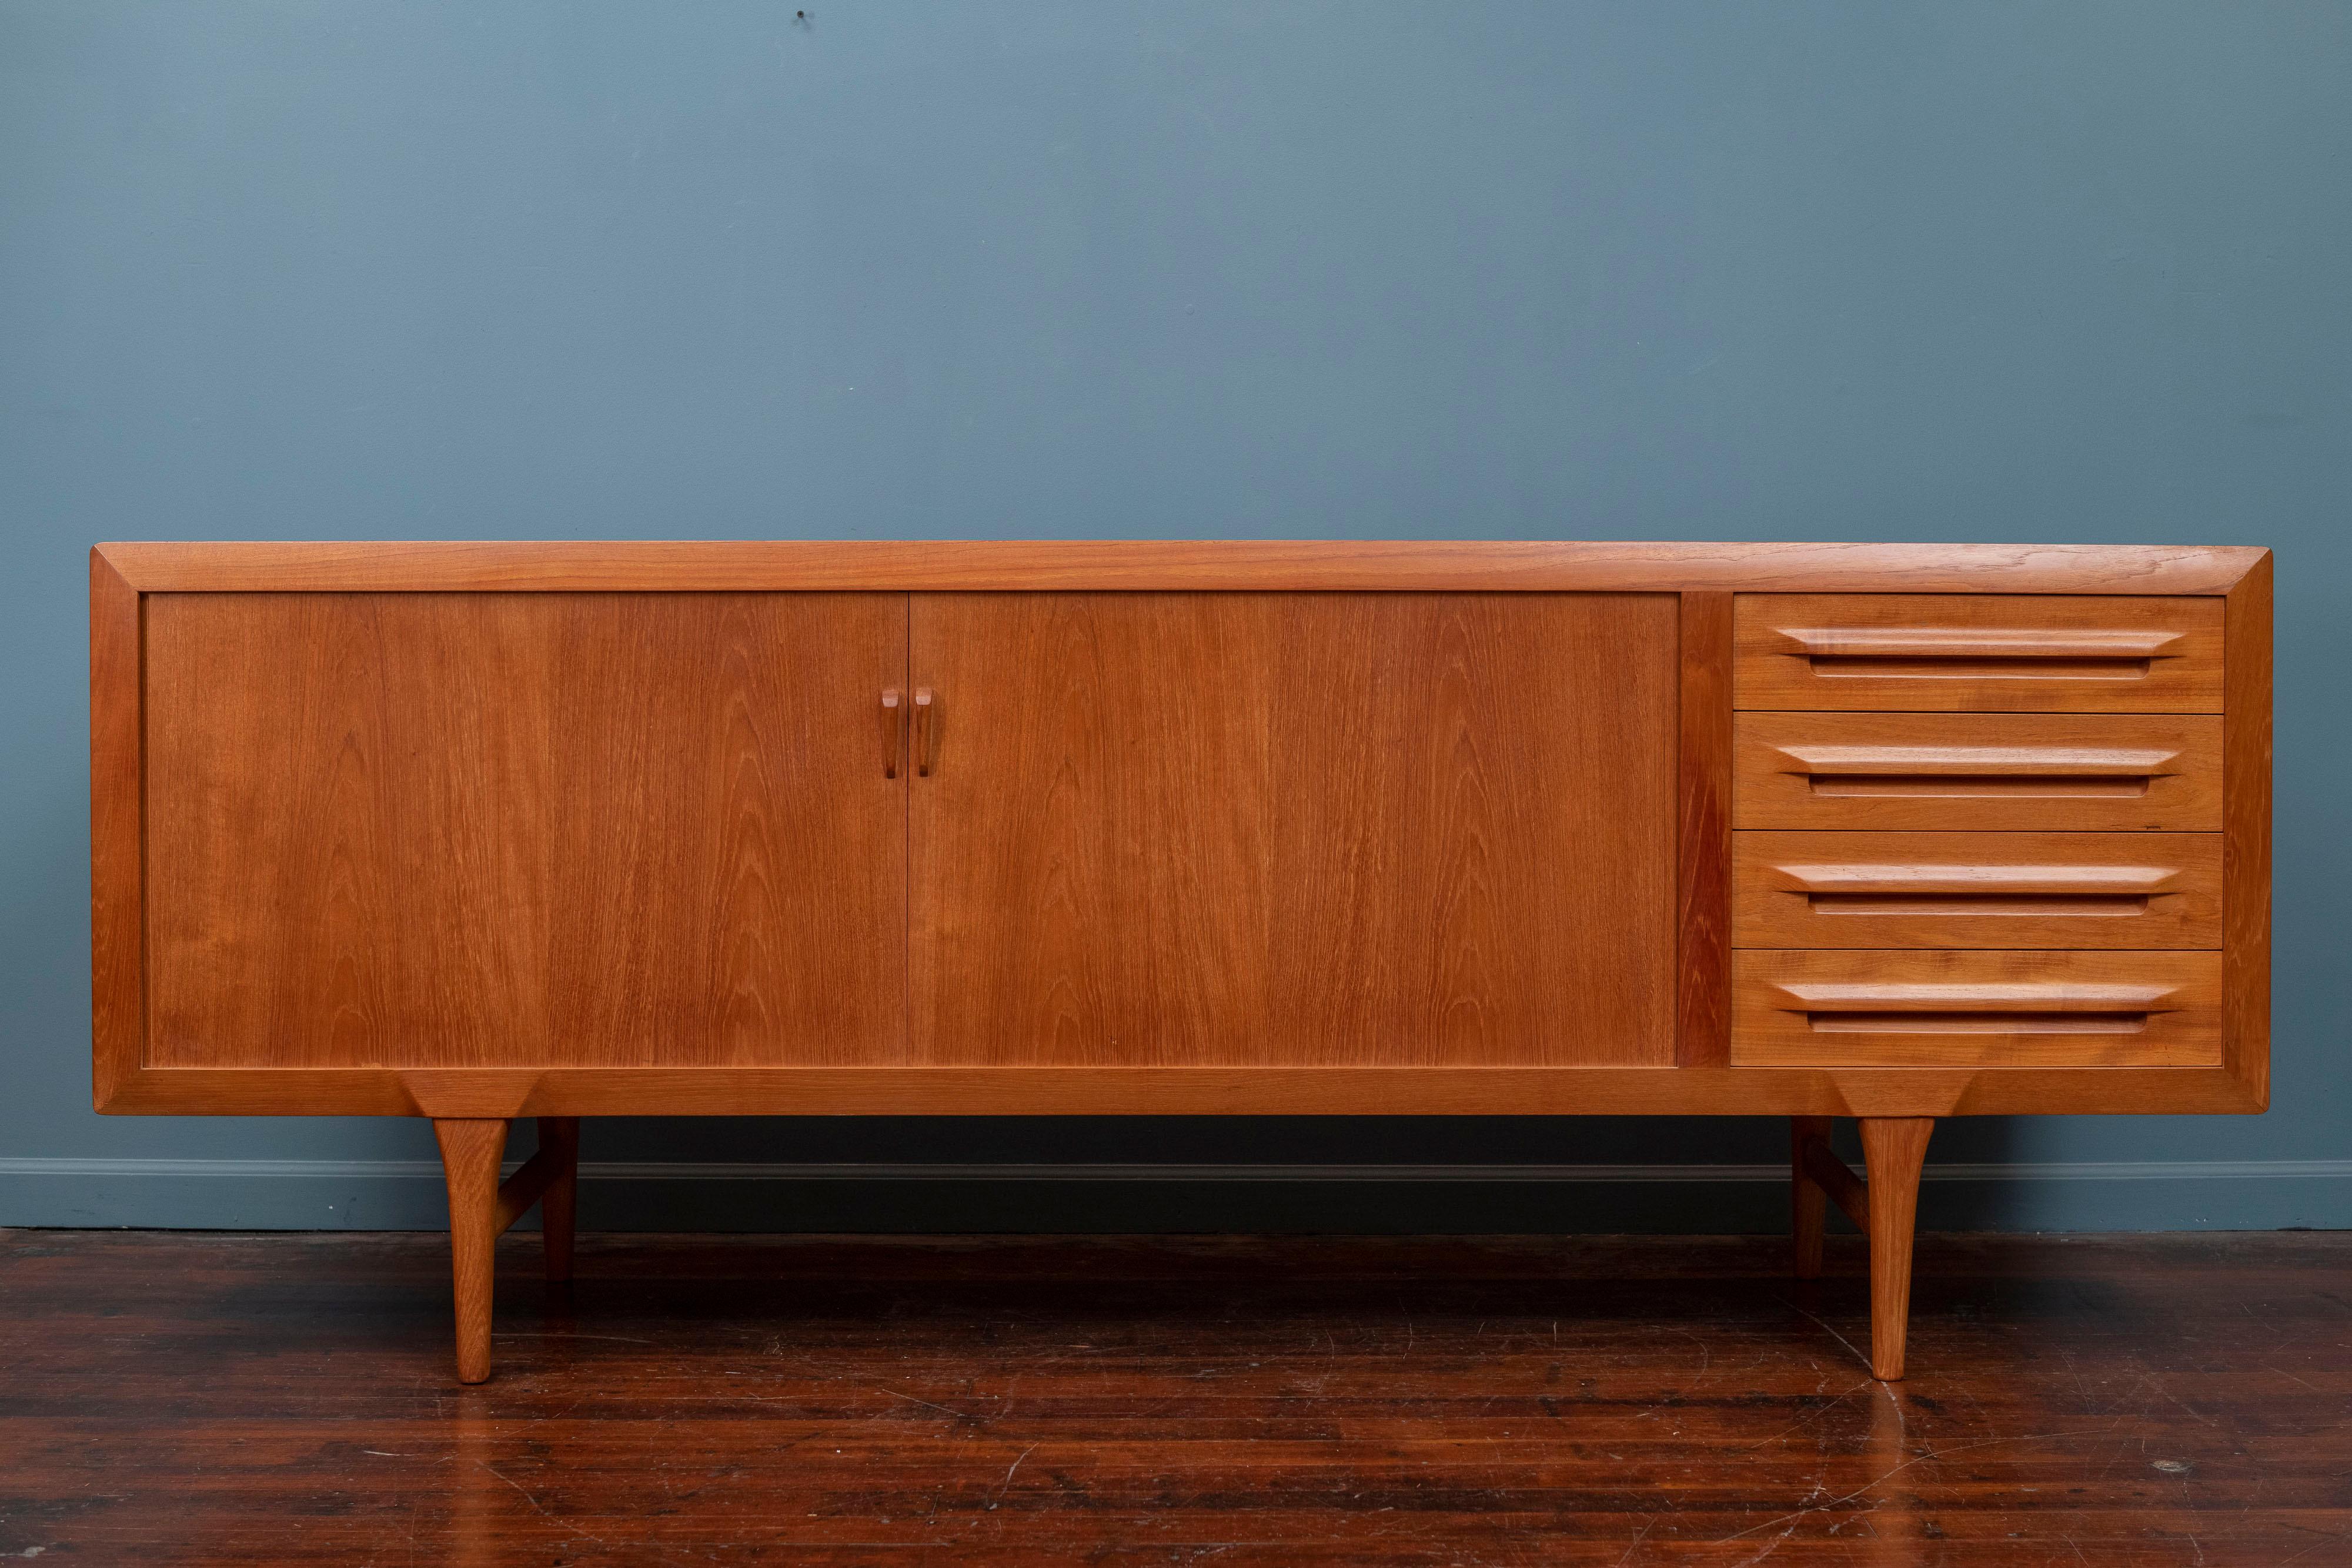 Tambour door credenza designed by Ib-Kofod Larsen for Faarup Møbelfabrik in Denmark, circa 1950s. Impeccably crafted in teak wood, this beautiful credenza shows an intricate wood grain throughout and features smoothly functioning tambour doors that